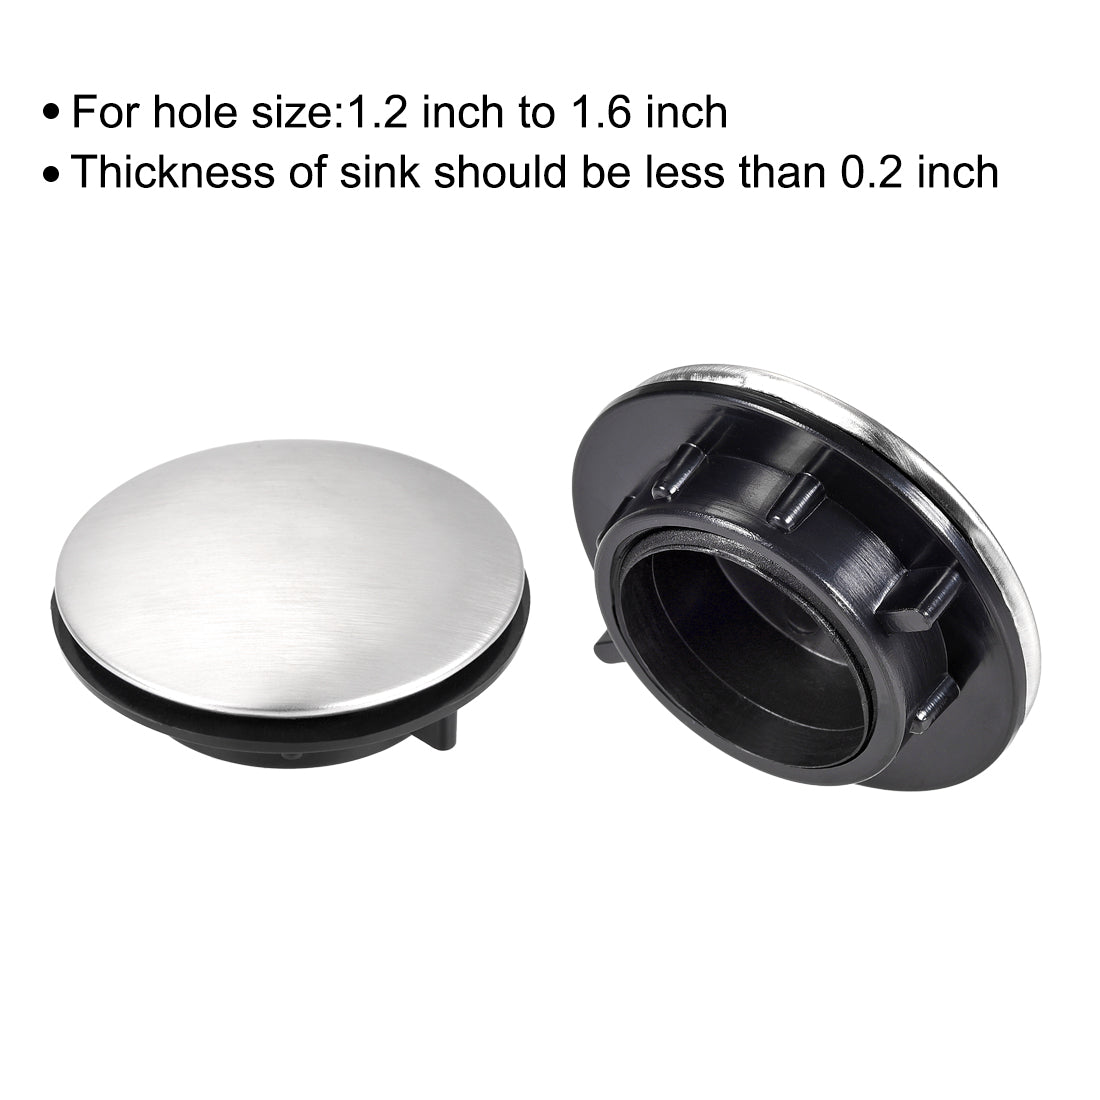 uxcell Uxcell Faucet Hole Cover for Dia 1.2 to 1.6 Inch, Kitchen Sink Tap Hole Cover, 2 Pcs